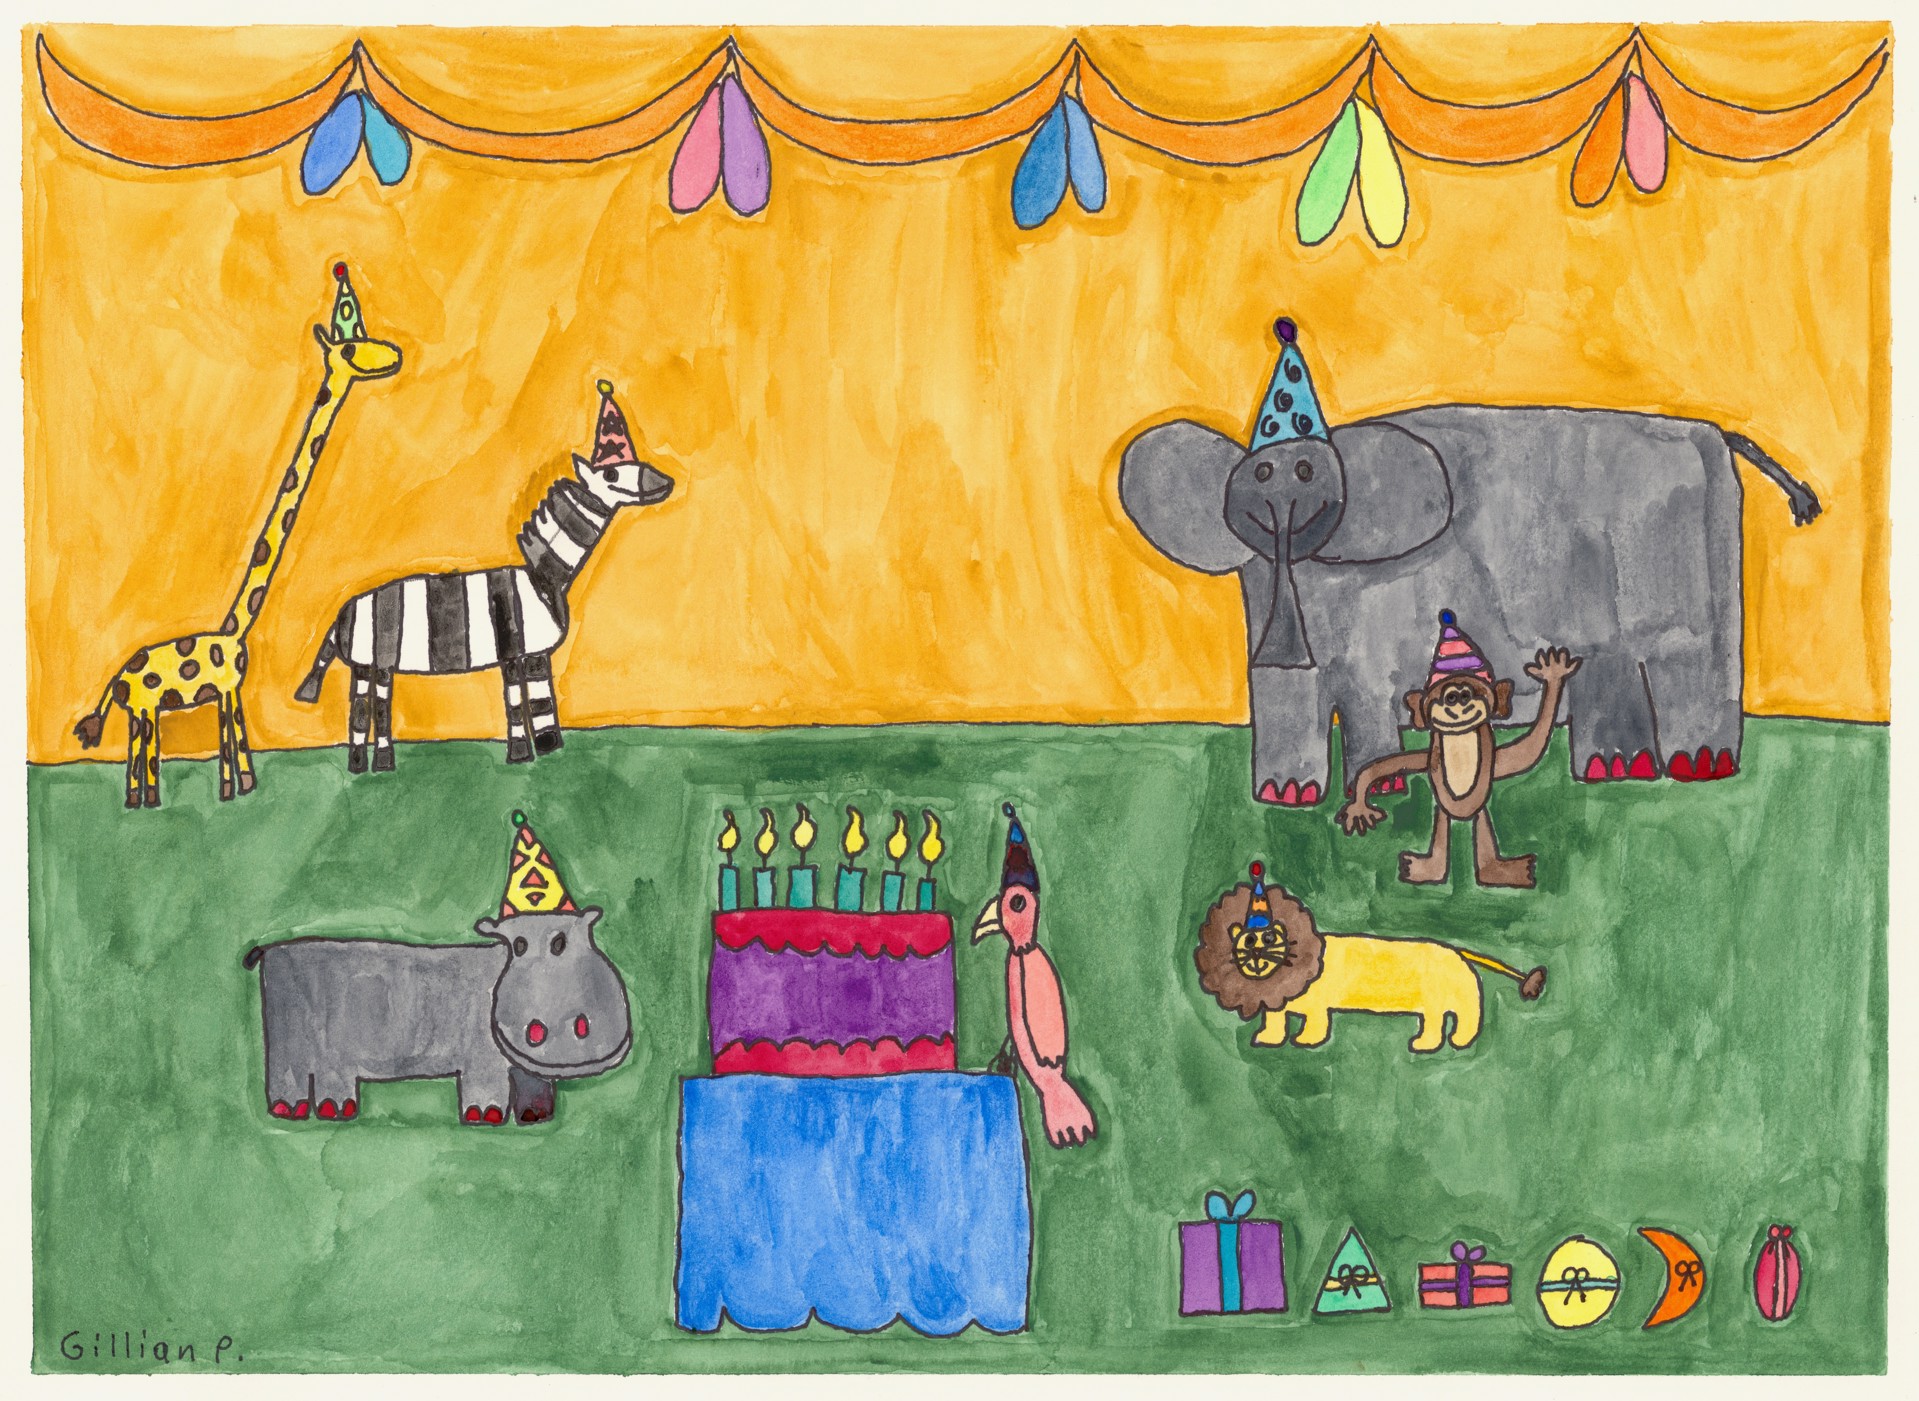 This is a Jungle Party by Gillian Patterson